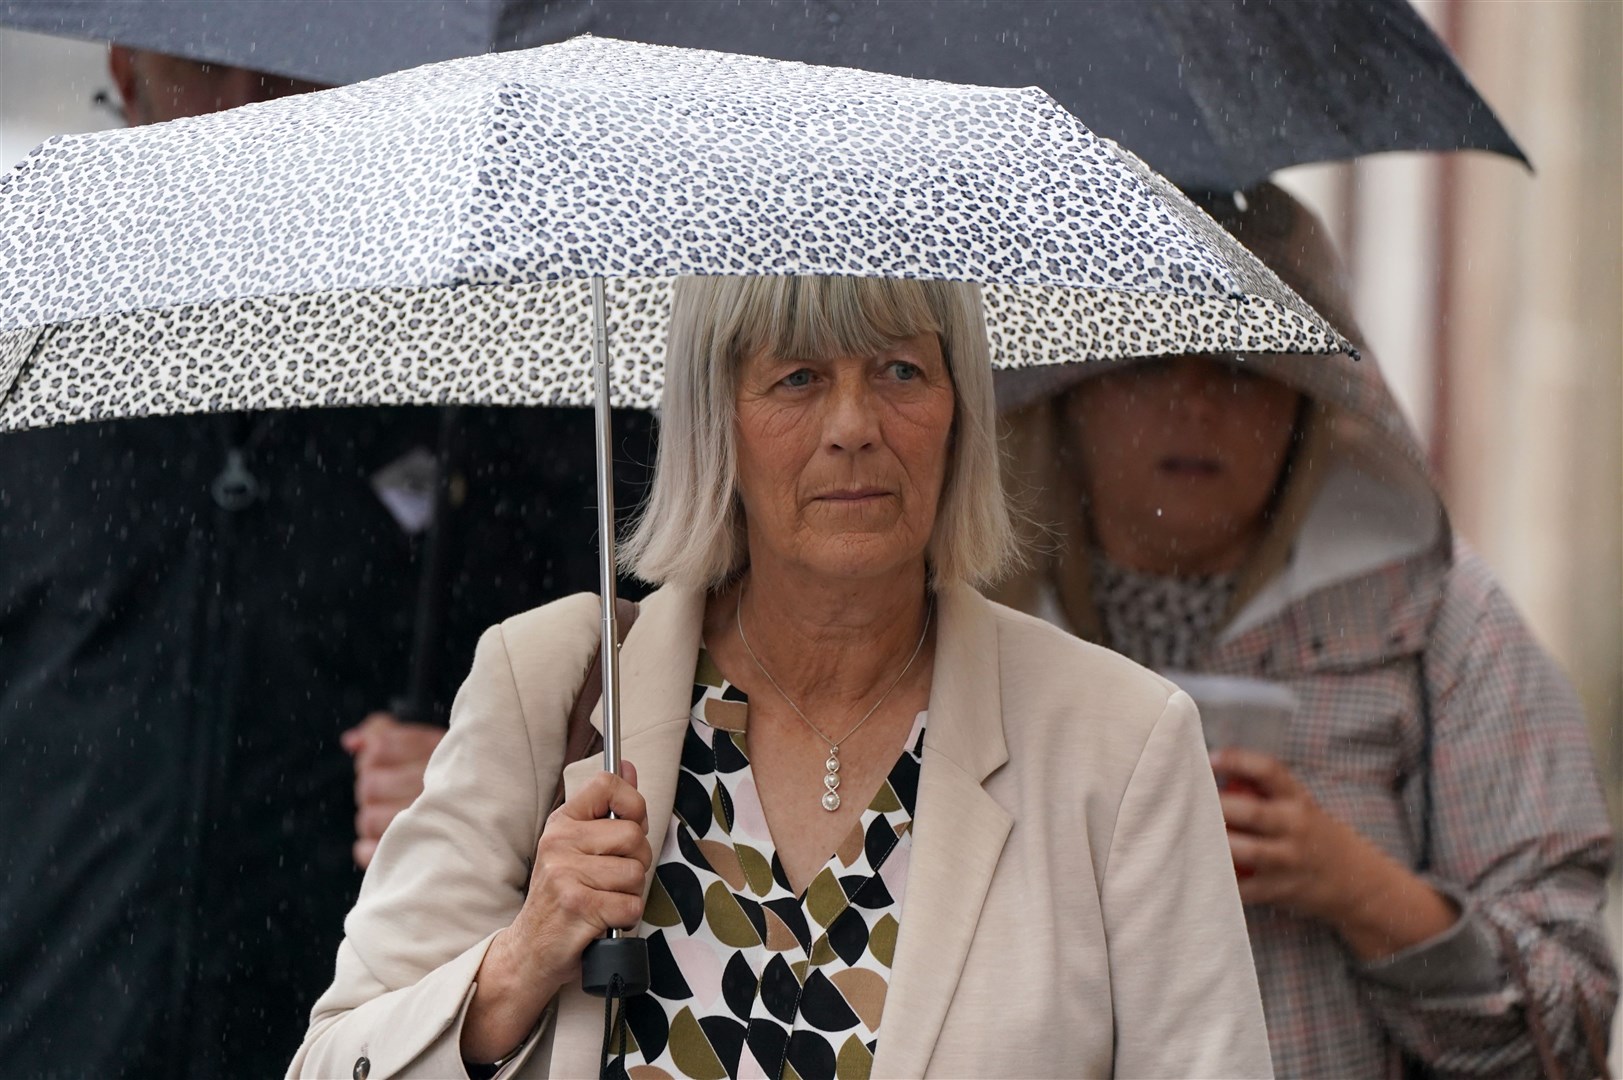 Jane Midgley, mother of victim Simon Midgley arriving at Paisley Sheriff Court for the fatal accident inquiry into the Cameron House Hotel fire (Andrew Milligan/PA)